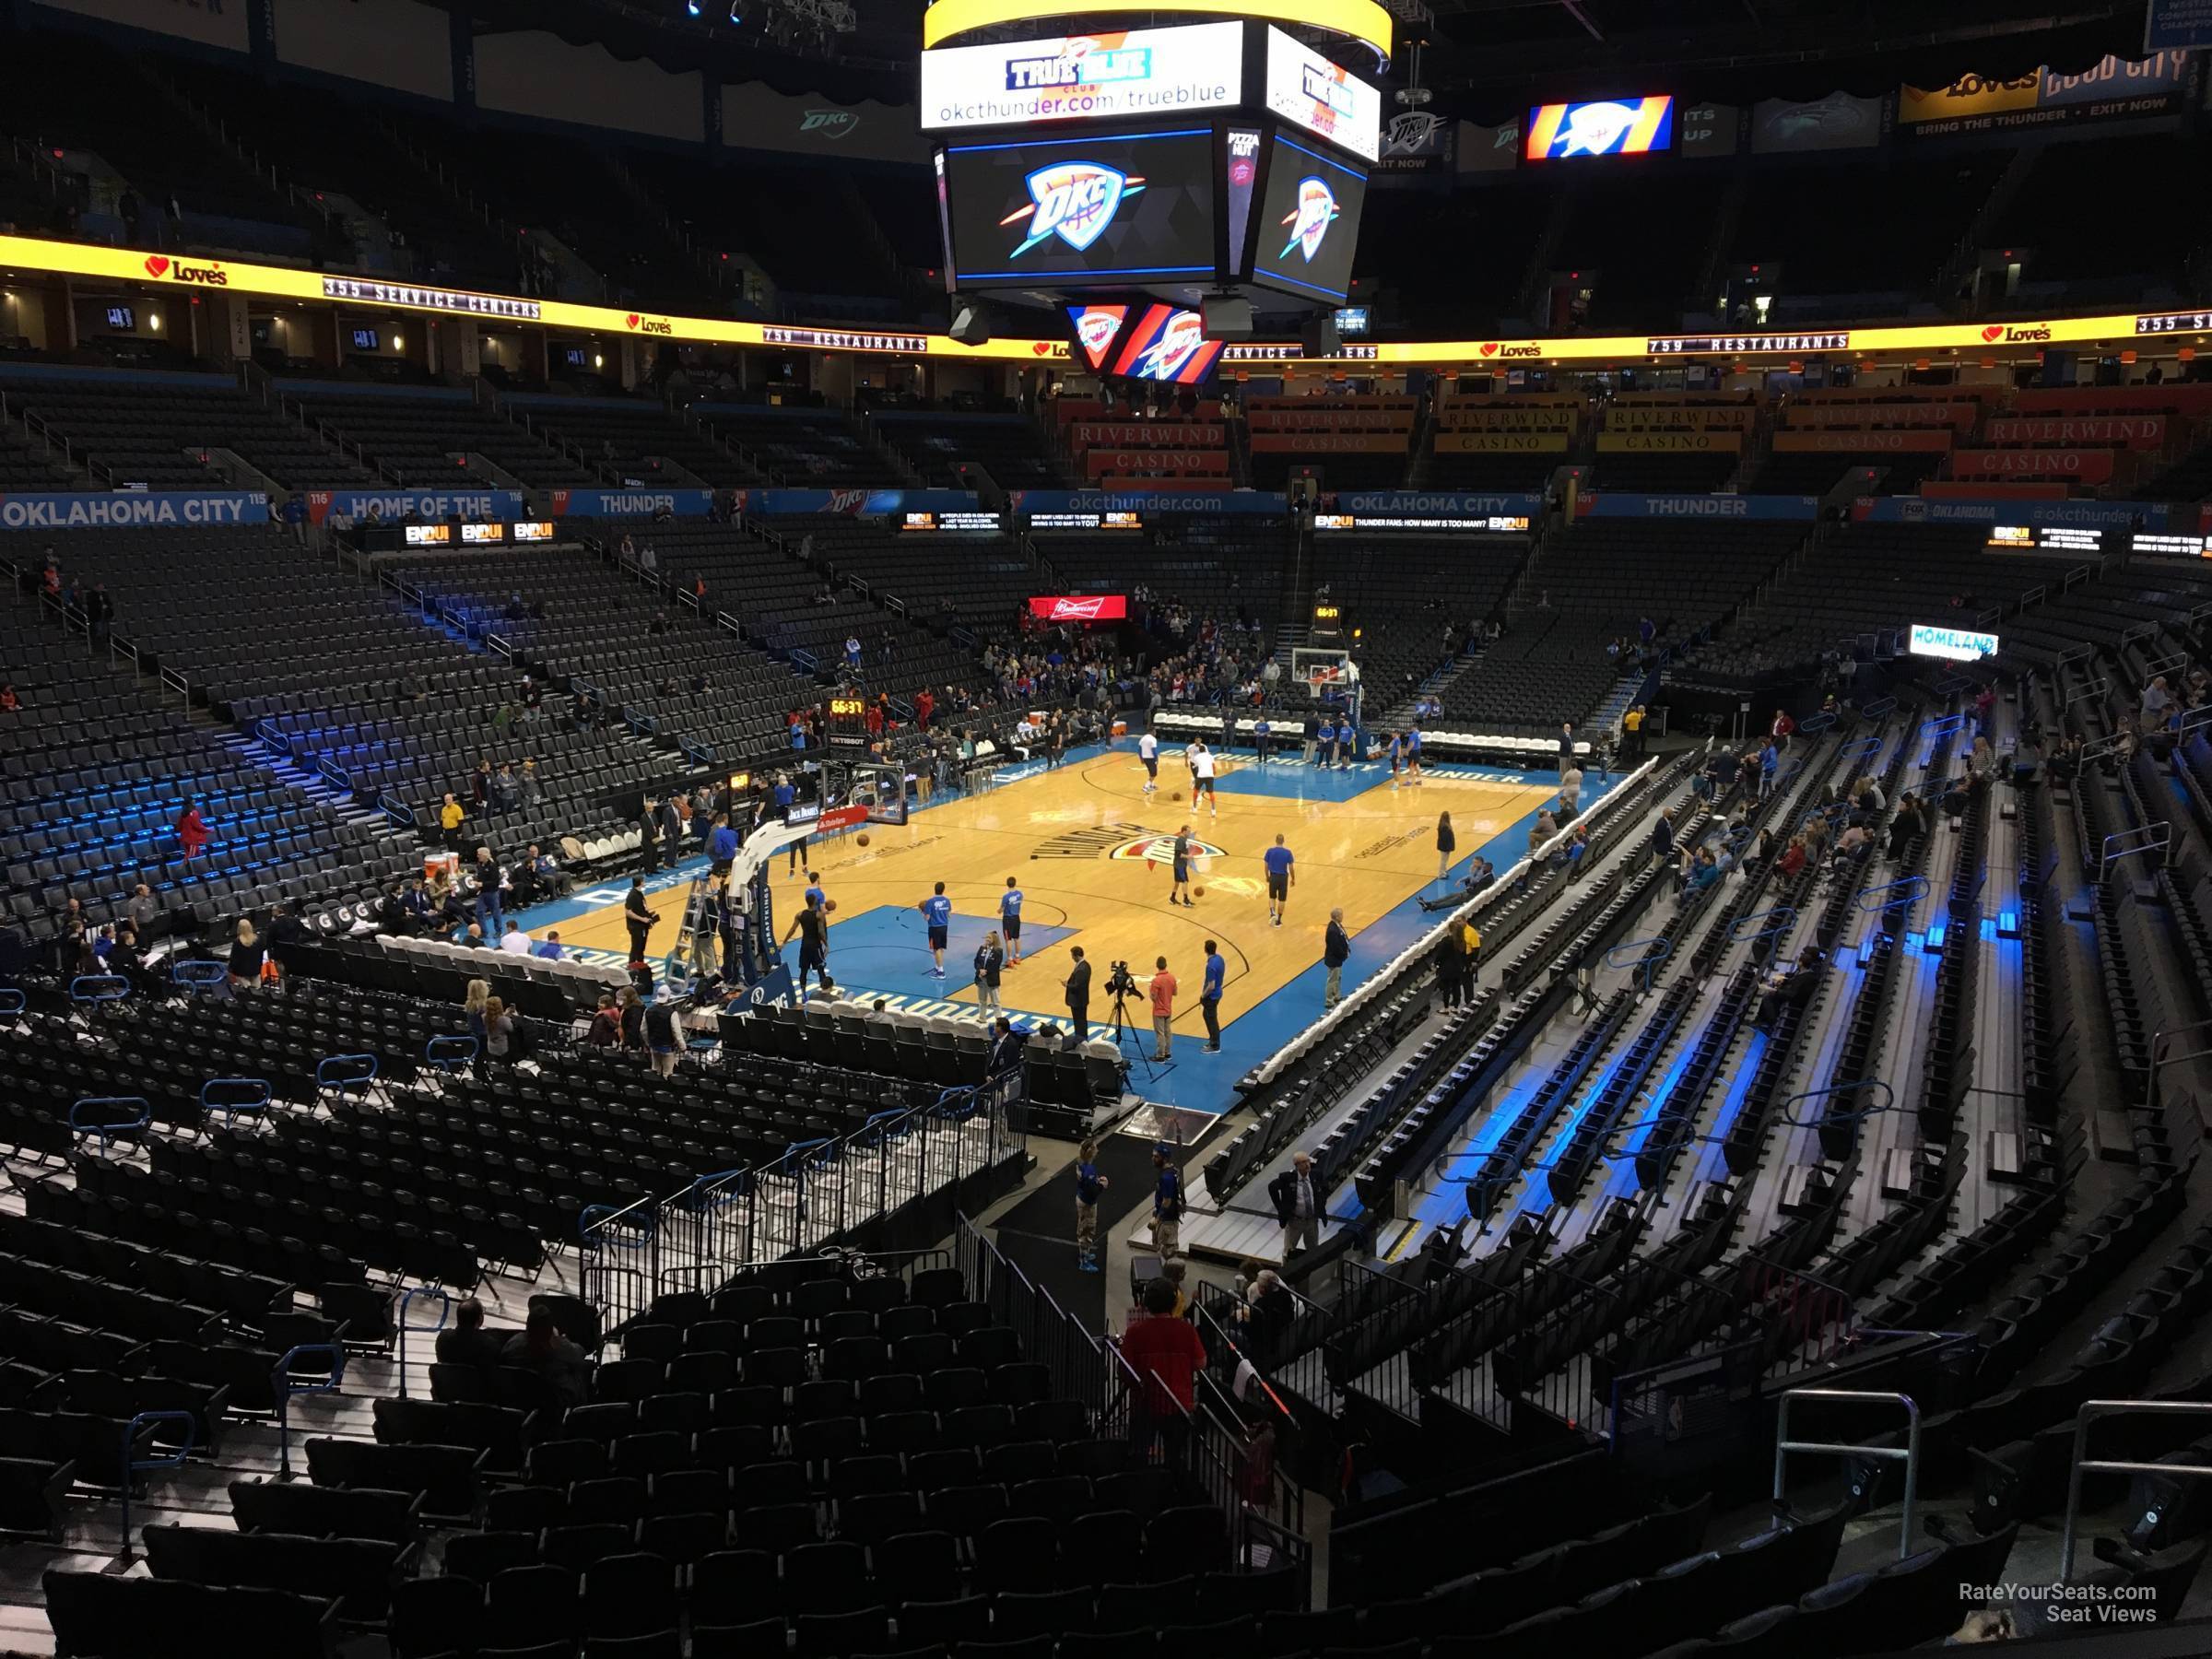 section 213, row a seat view  for basketball - paycom center